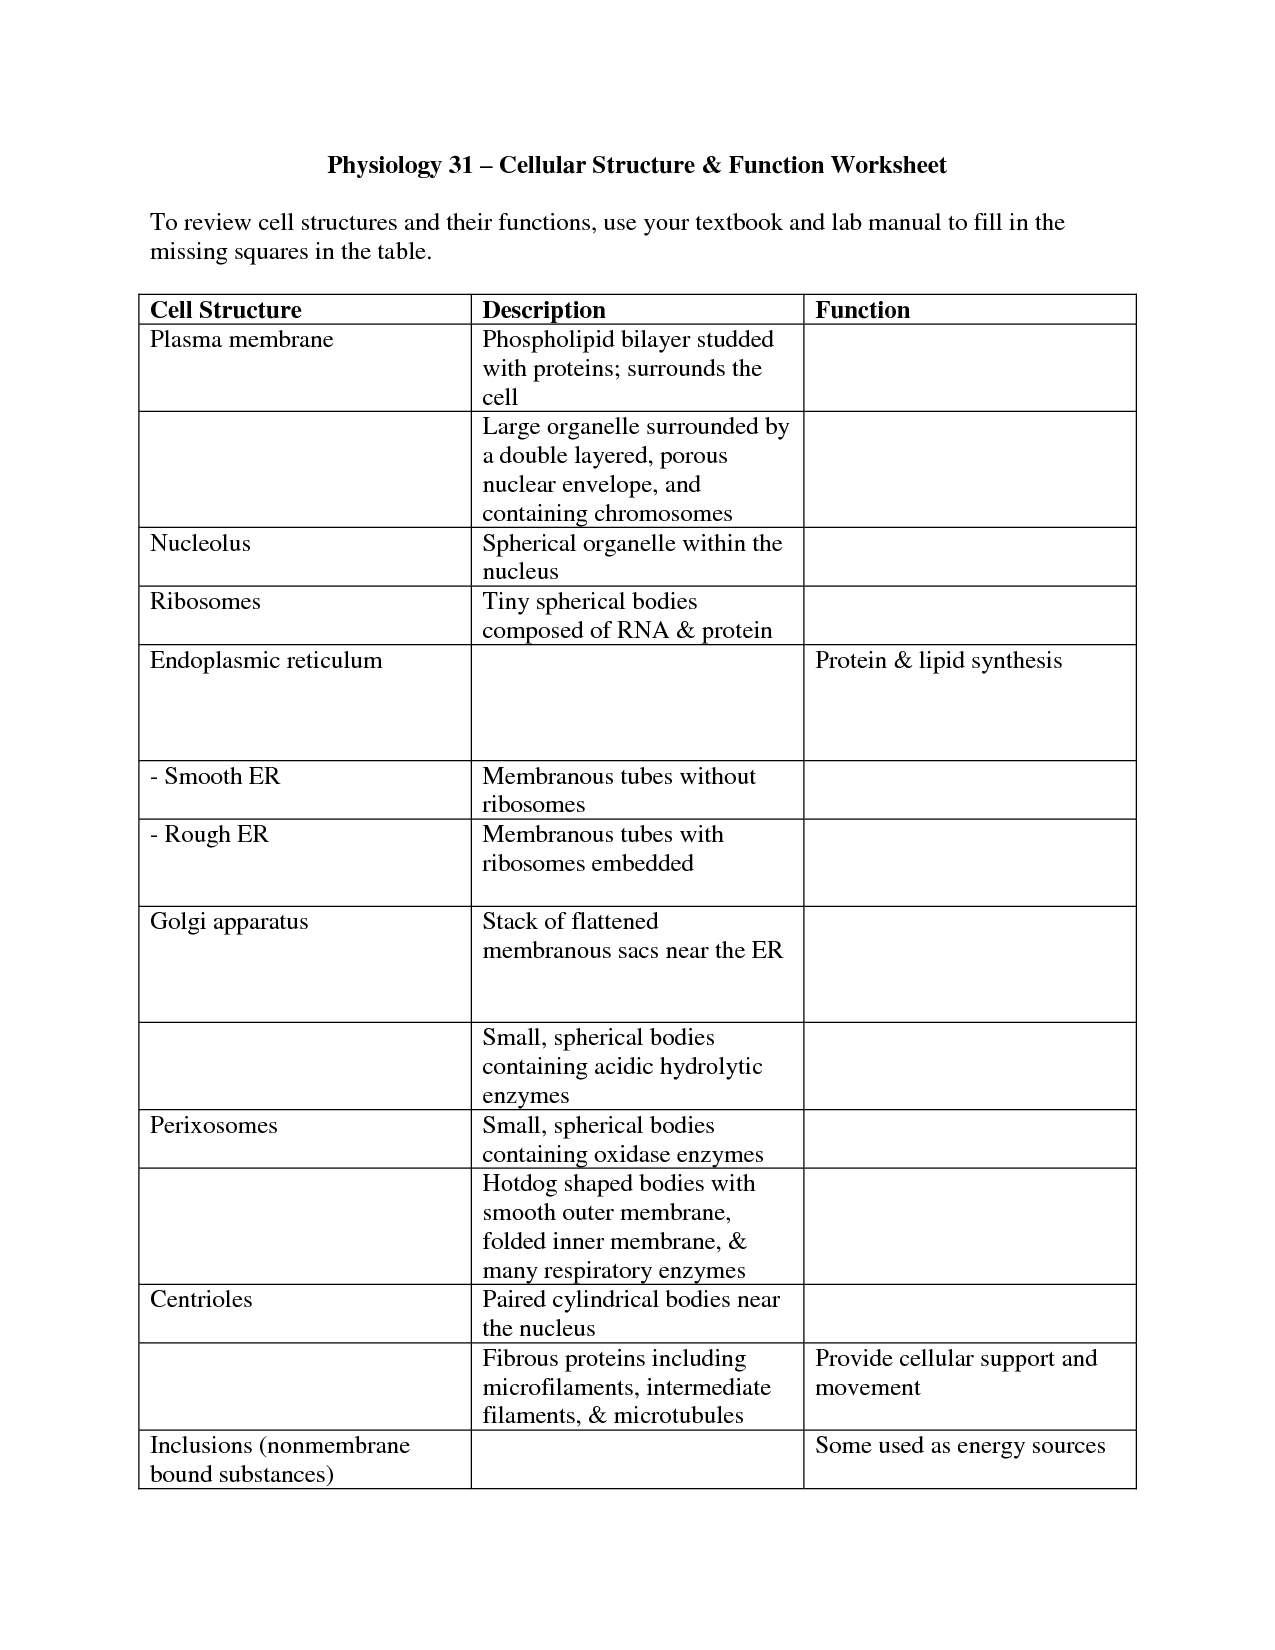 15 Best Images of Cell Structure And Processes Worksheet - Virtual Cell